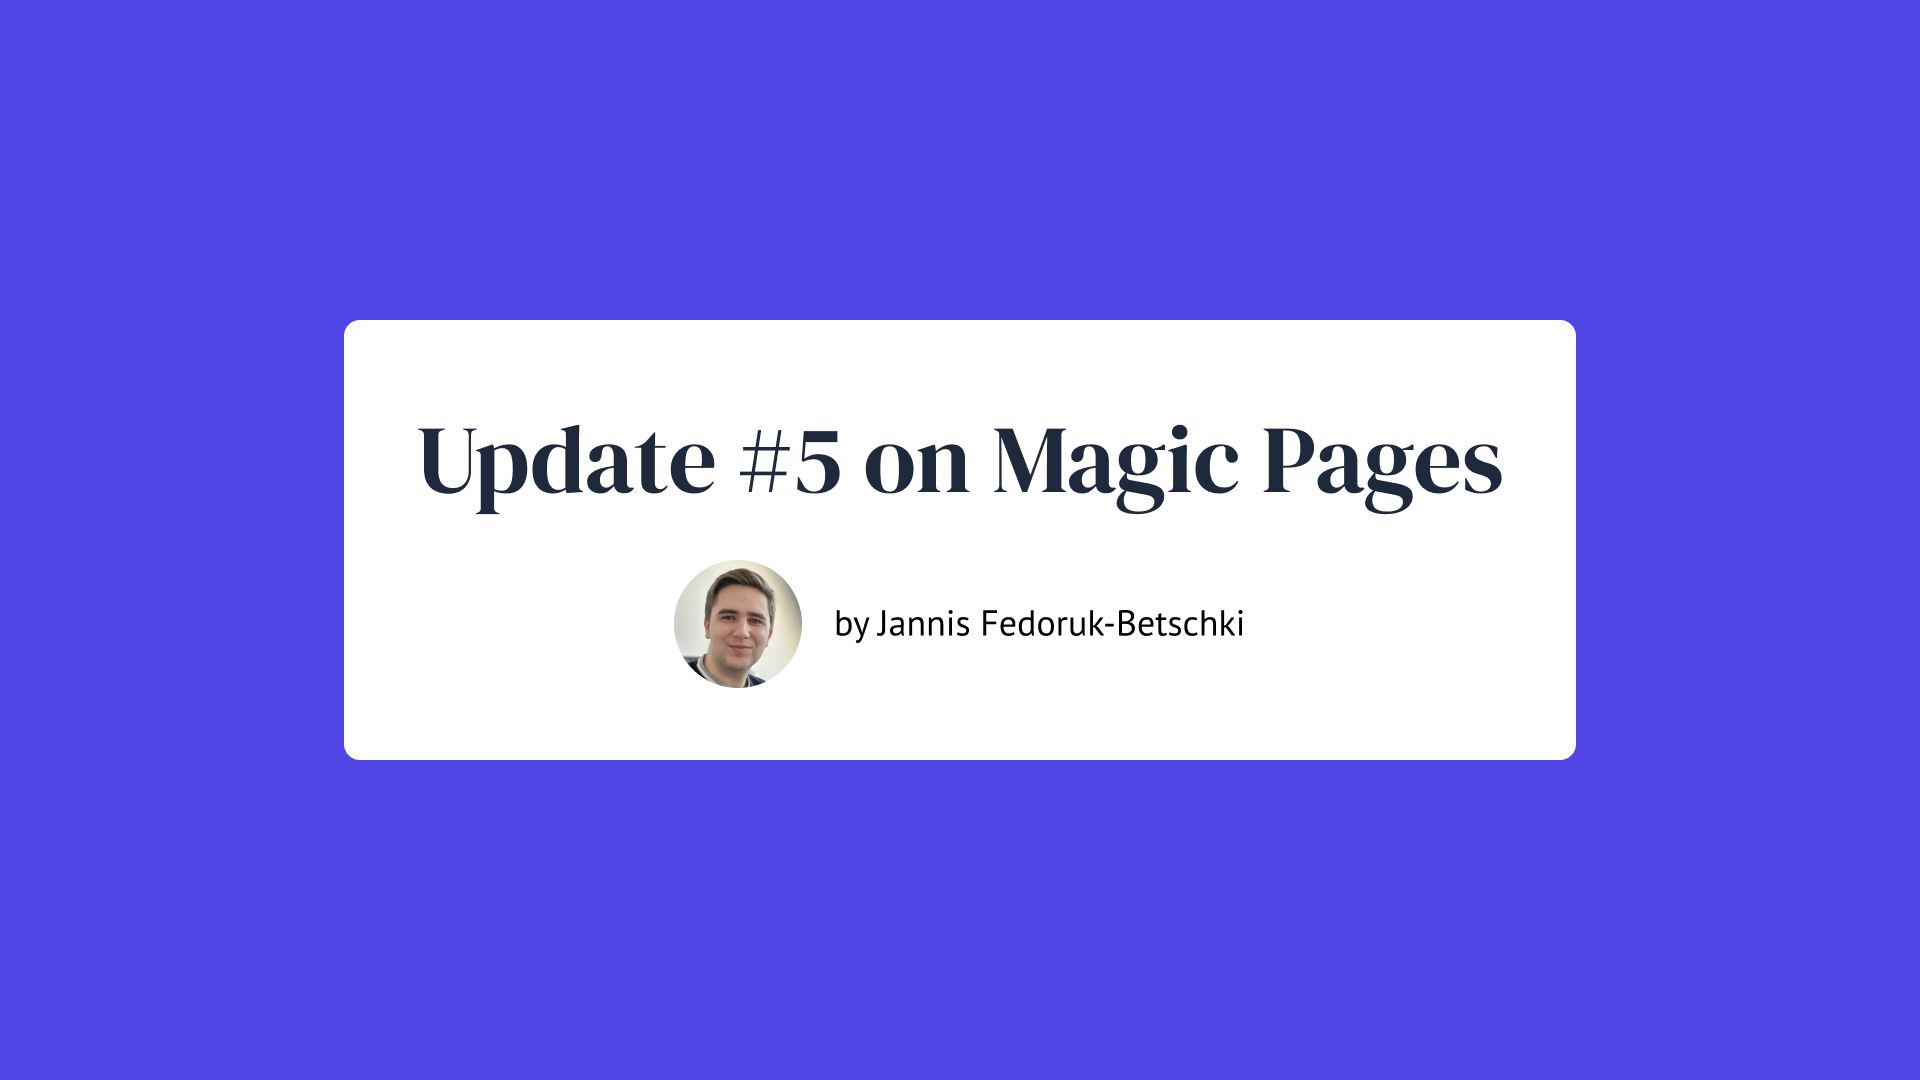 Update #5 on Magic Pages by Jannis Fedoruk-Betschki